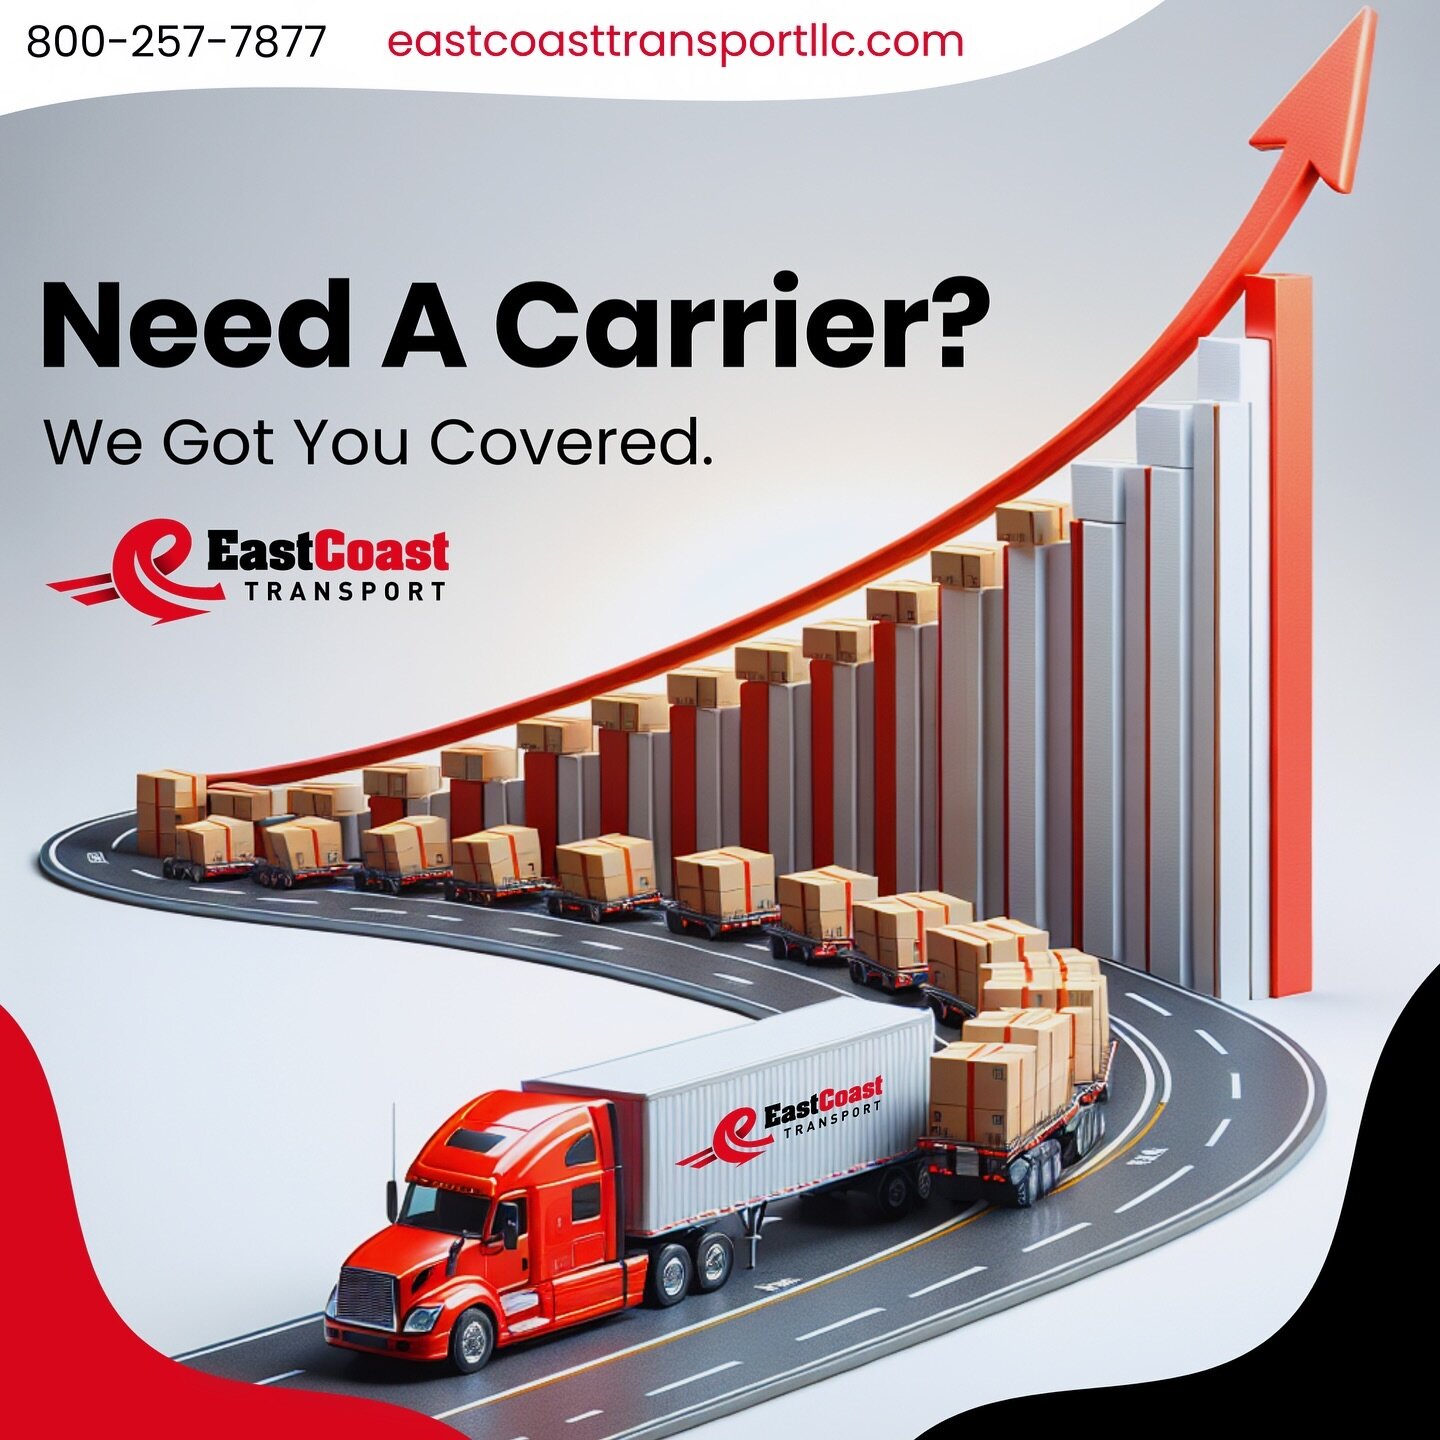 Safe. Reliable. Fast. Fulfillment.

Our team at East Coast Transport understands that every minute counts in business. Trust us to get the job done! 

#eastcoasttransport #logistics #3pl #ect3pl #freight #carrier #broker #logistscompany #truck #shipp